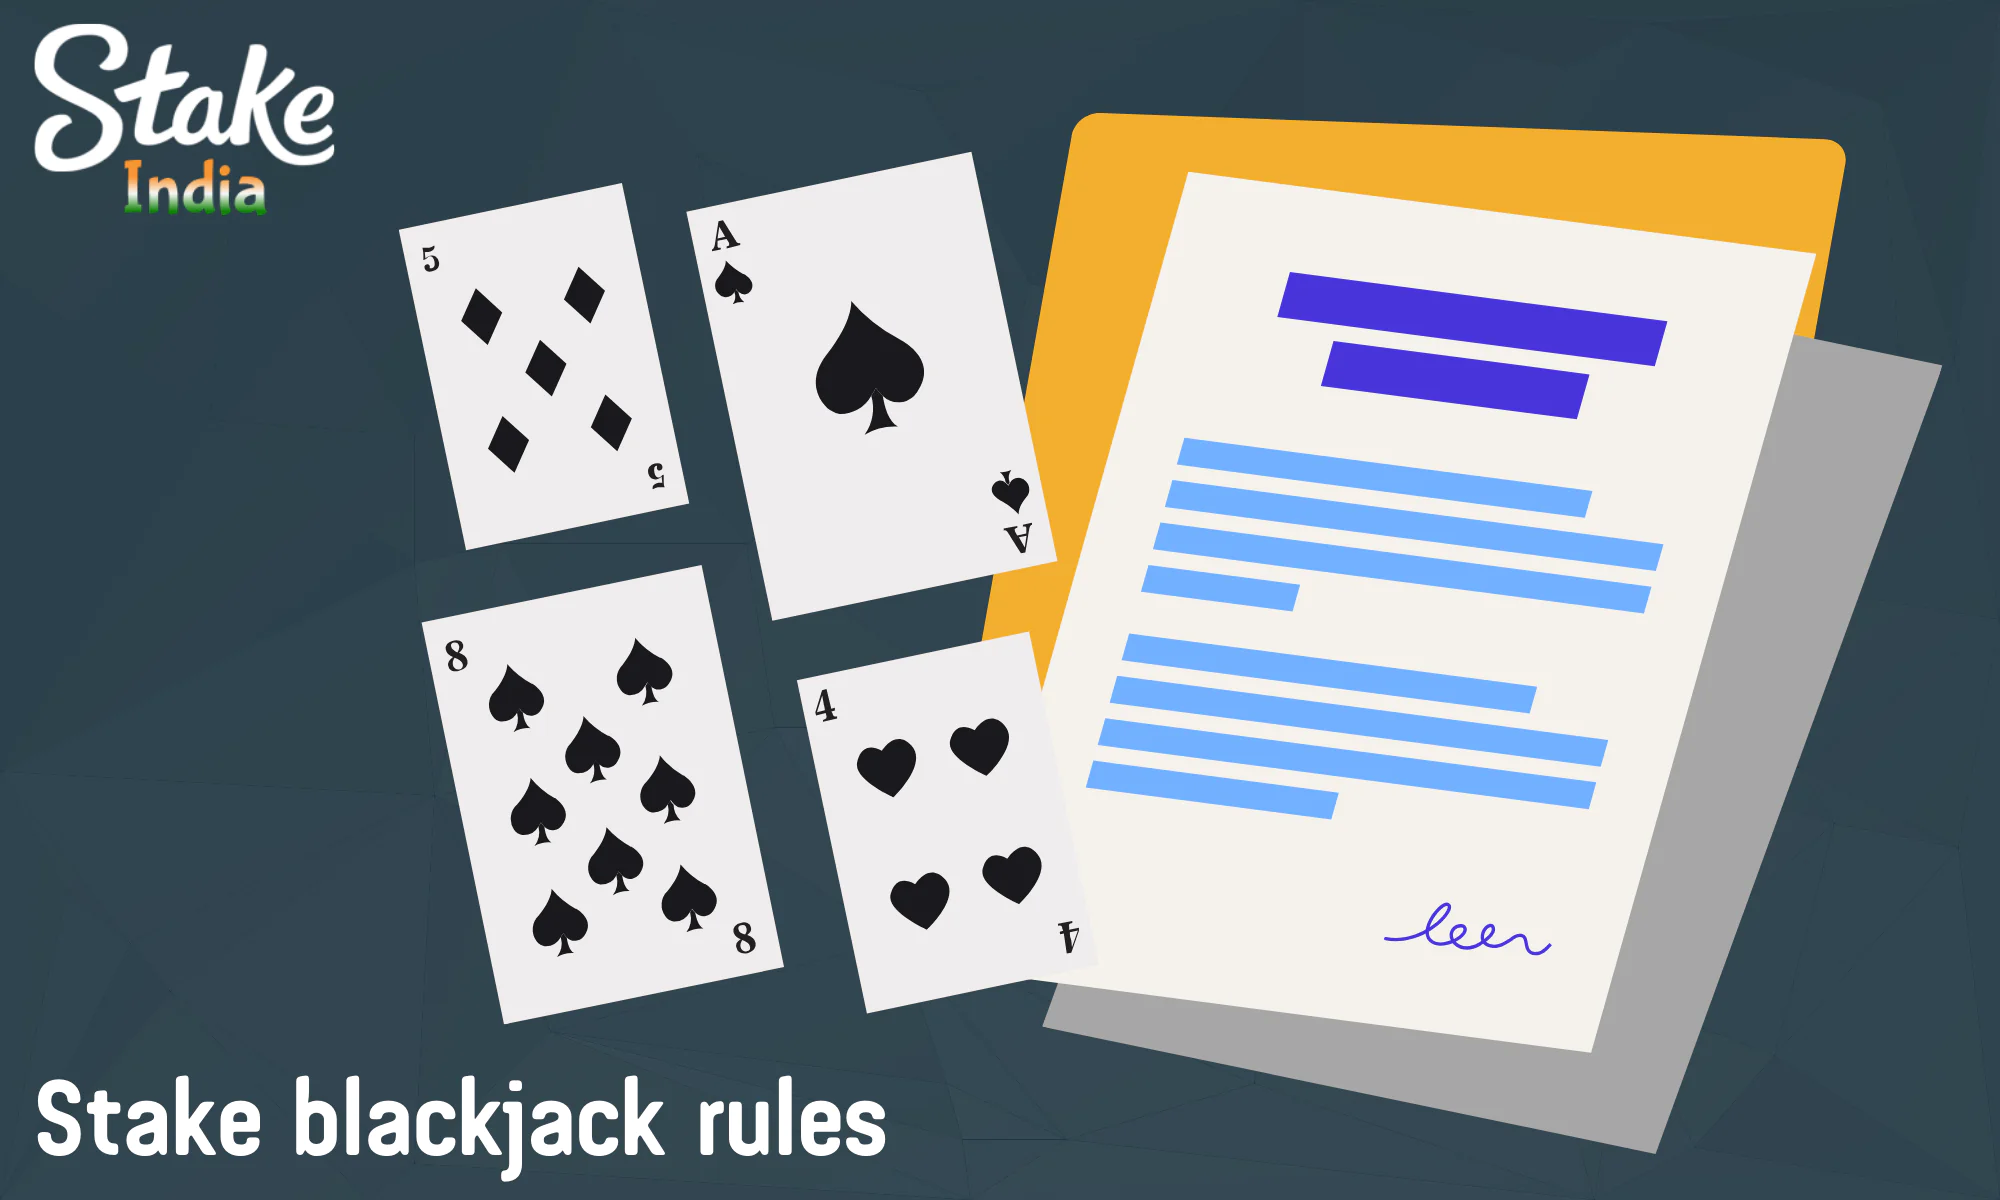 Be sure to read the Blackjack Stake rules before you start